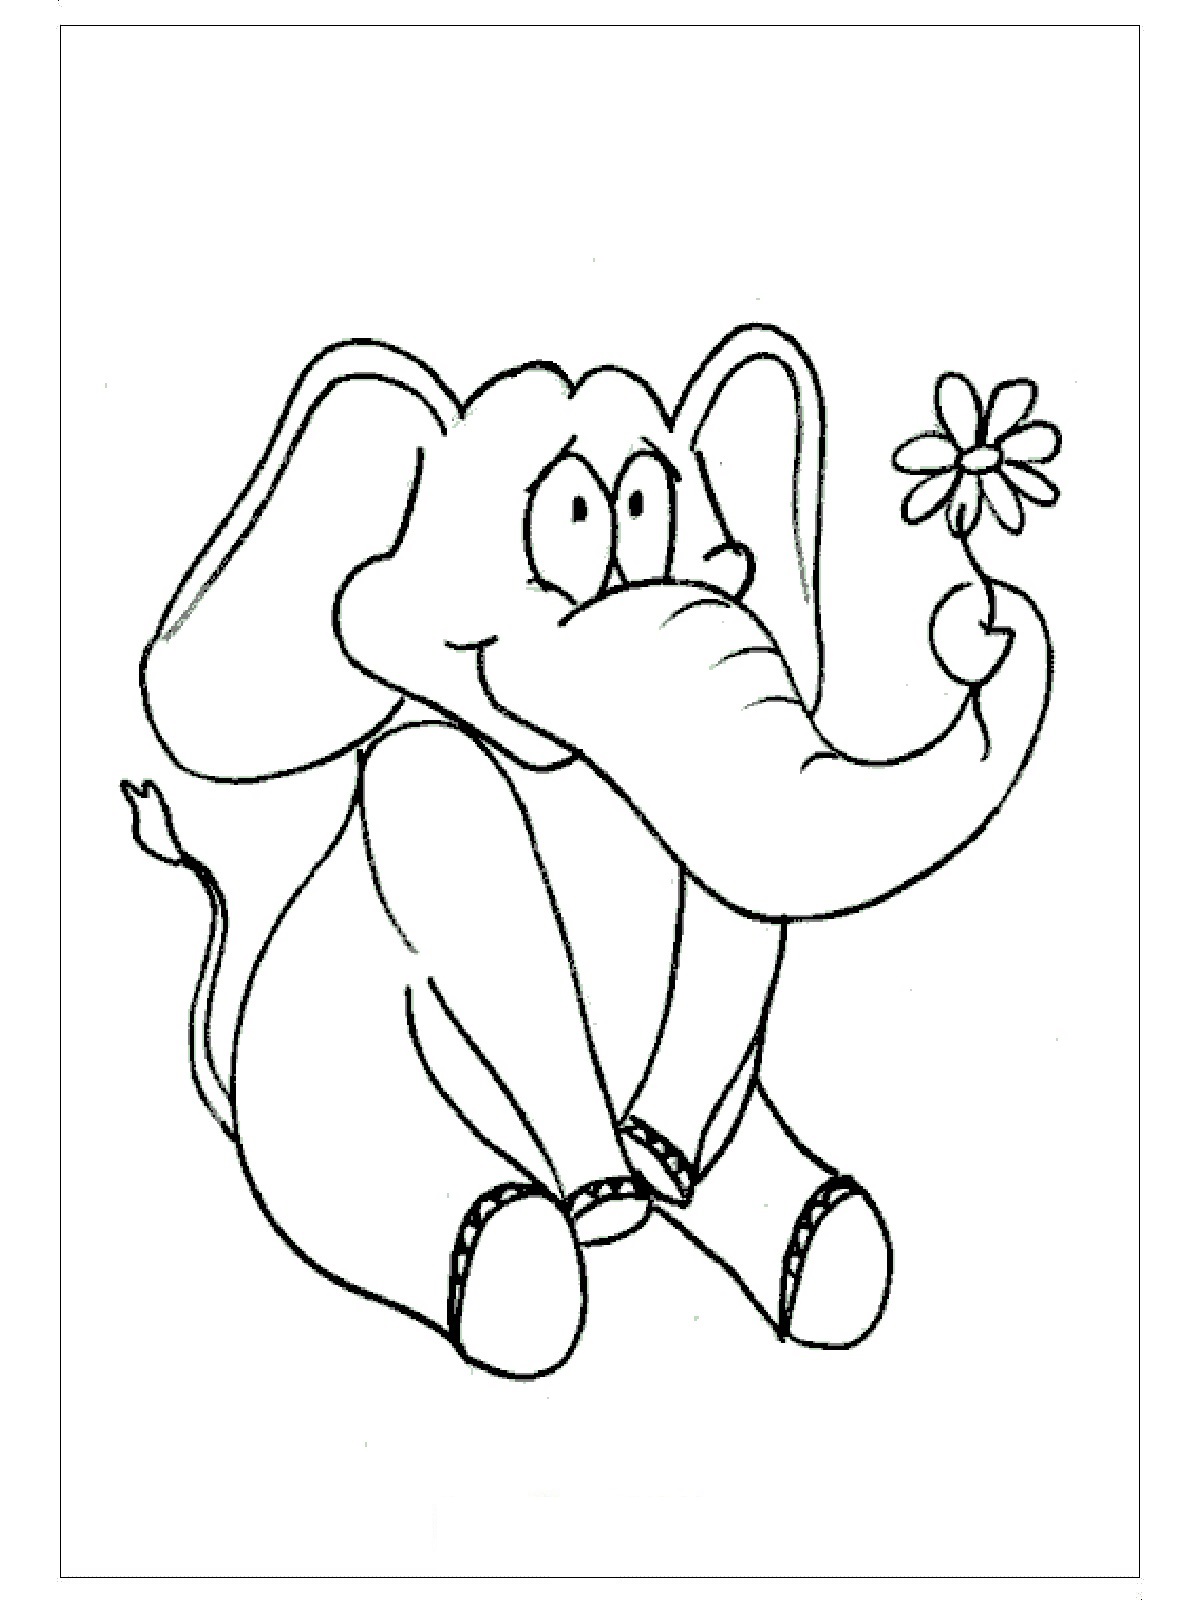 Download Elephant Coloring Pages For Kids - Preschool and ...